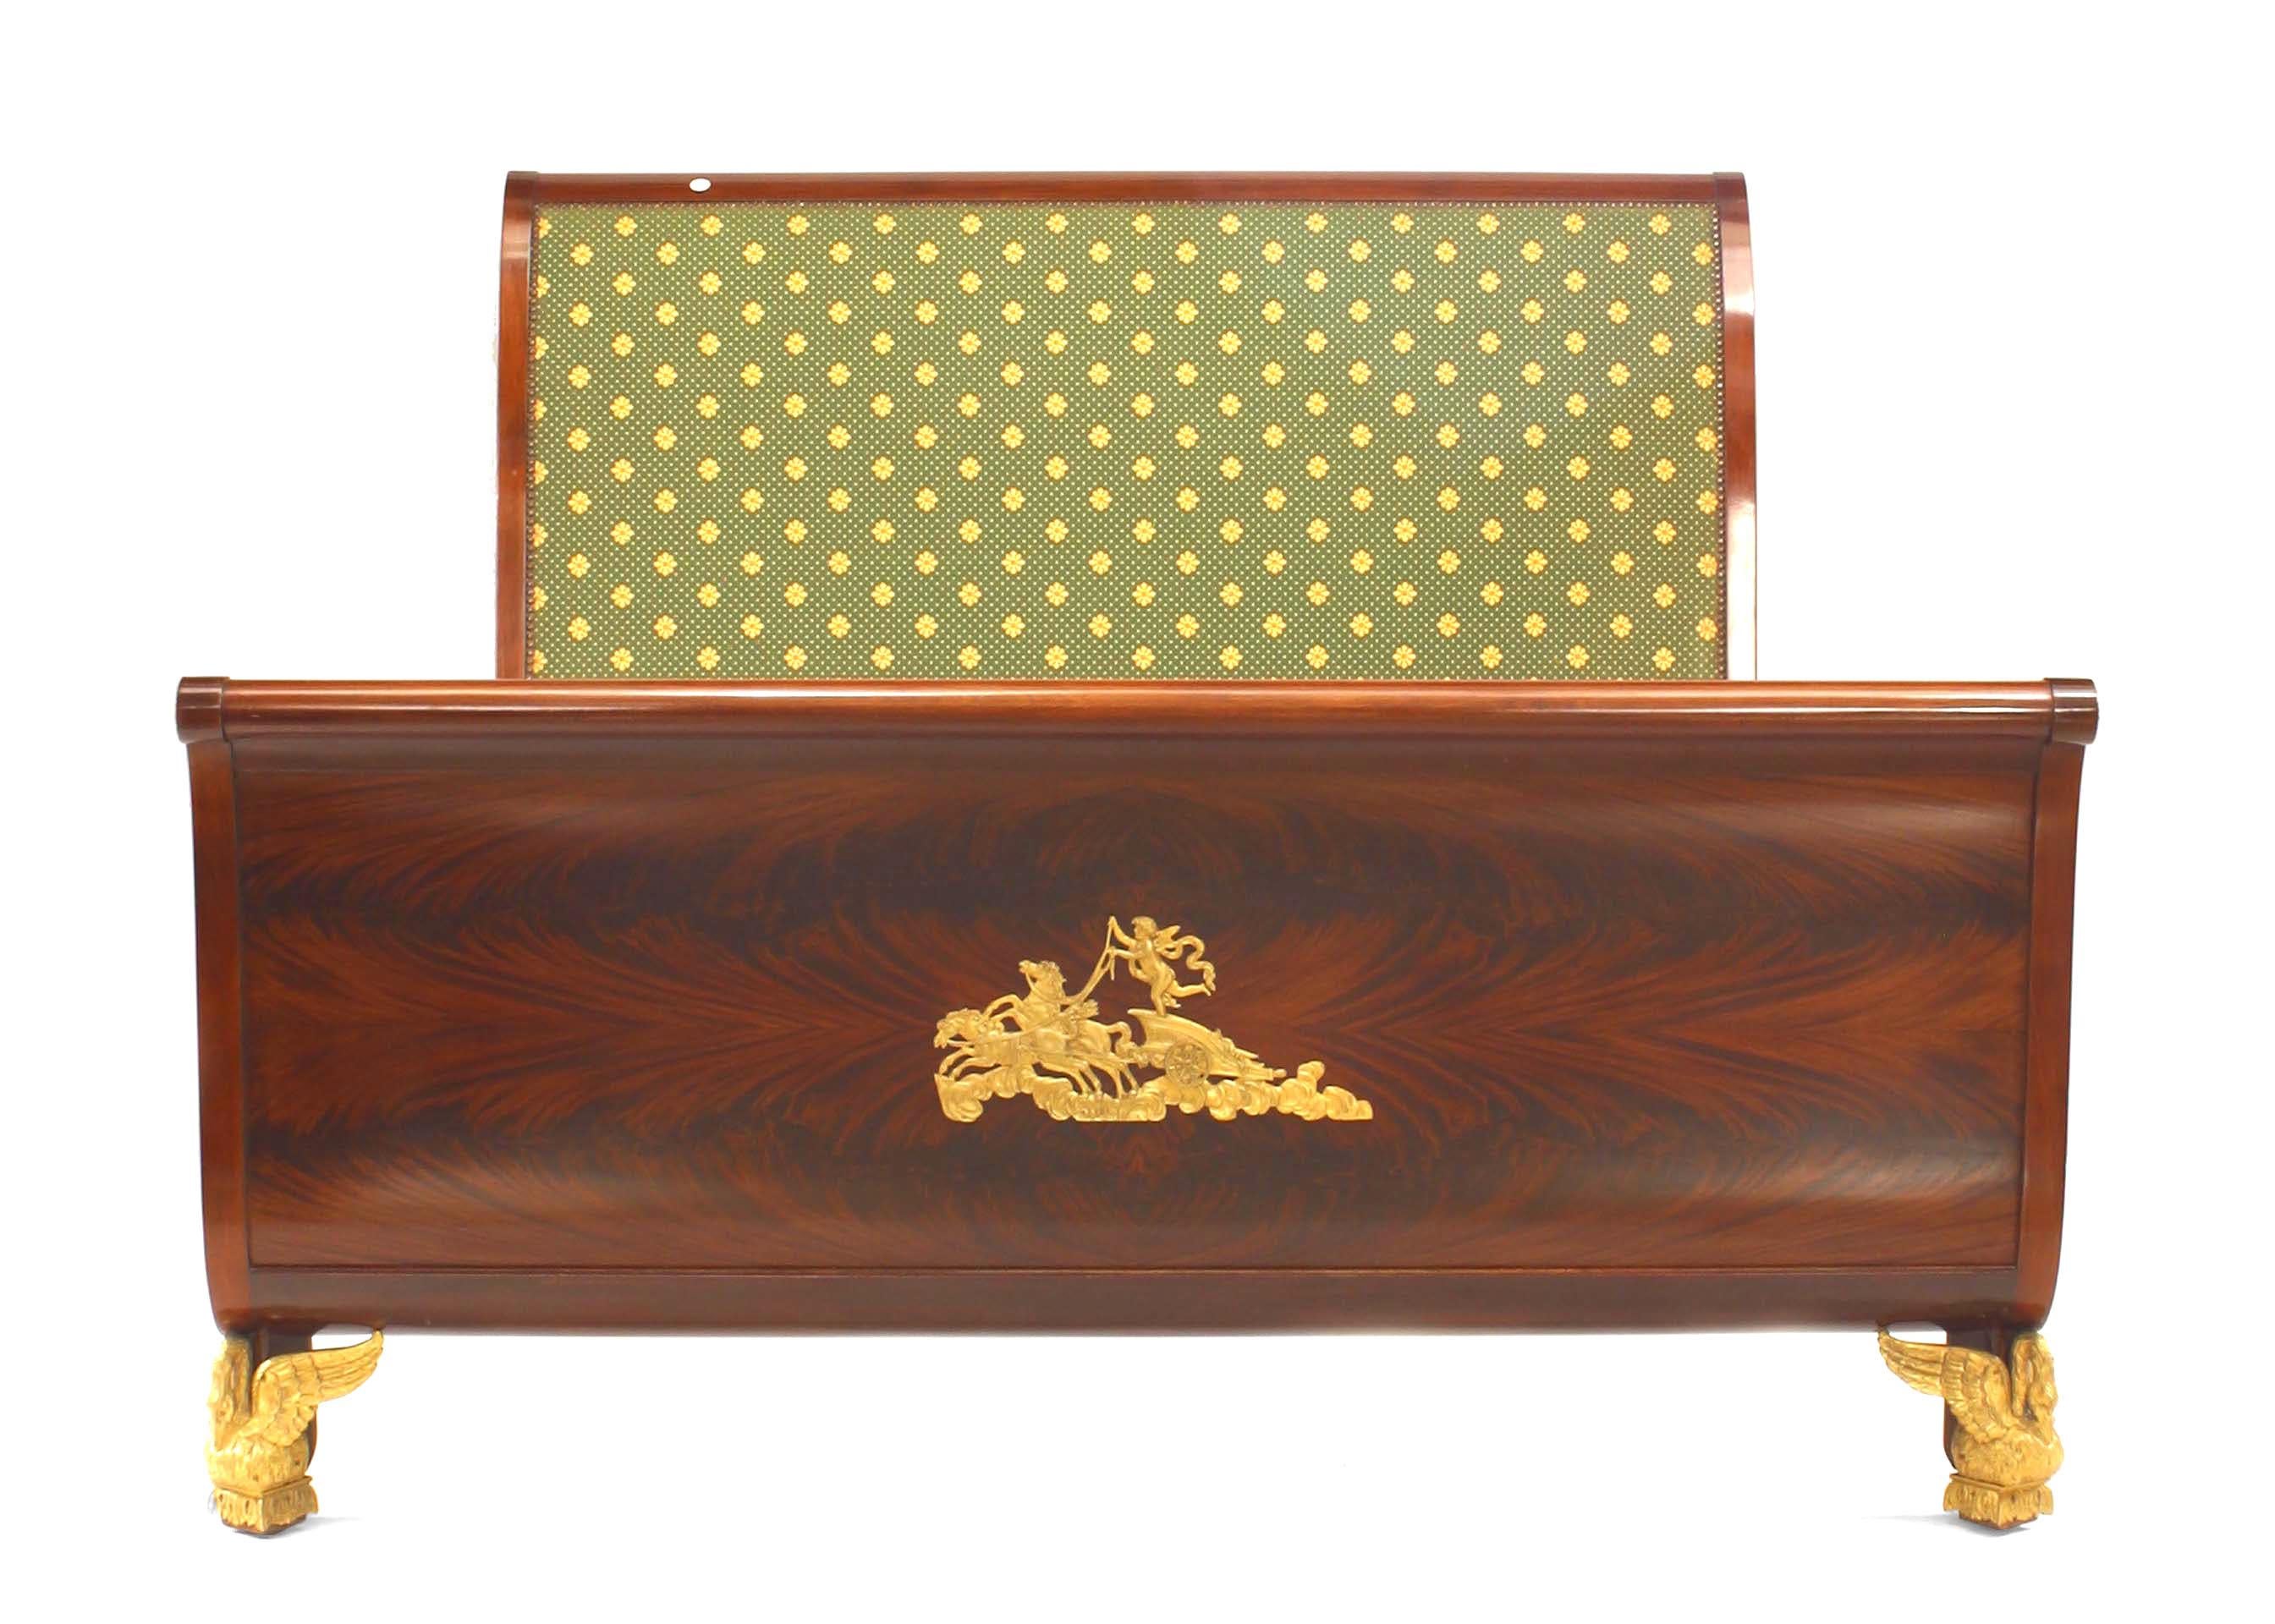 French Empire-style (19/20th Century) mahogany queen size bed with gilt bronze trim and upholstered panel on headboard (includes: headboard, footboard, rails).
